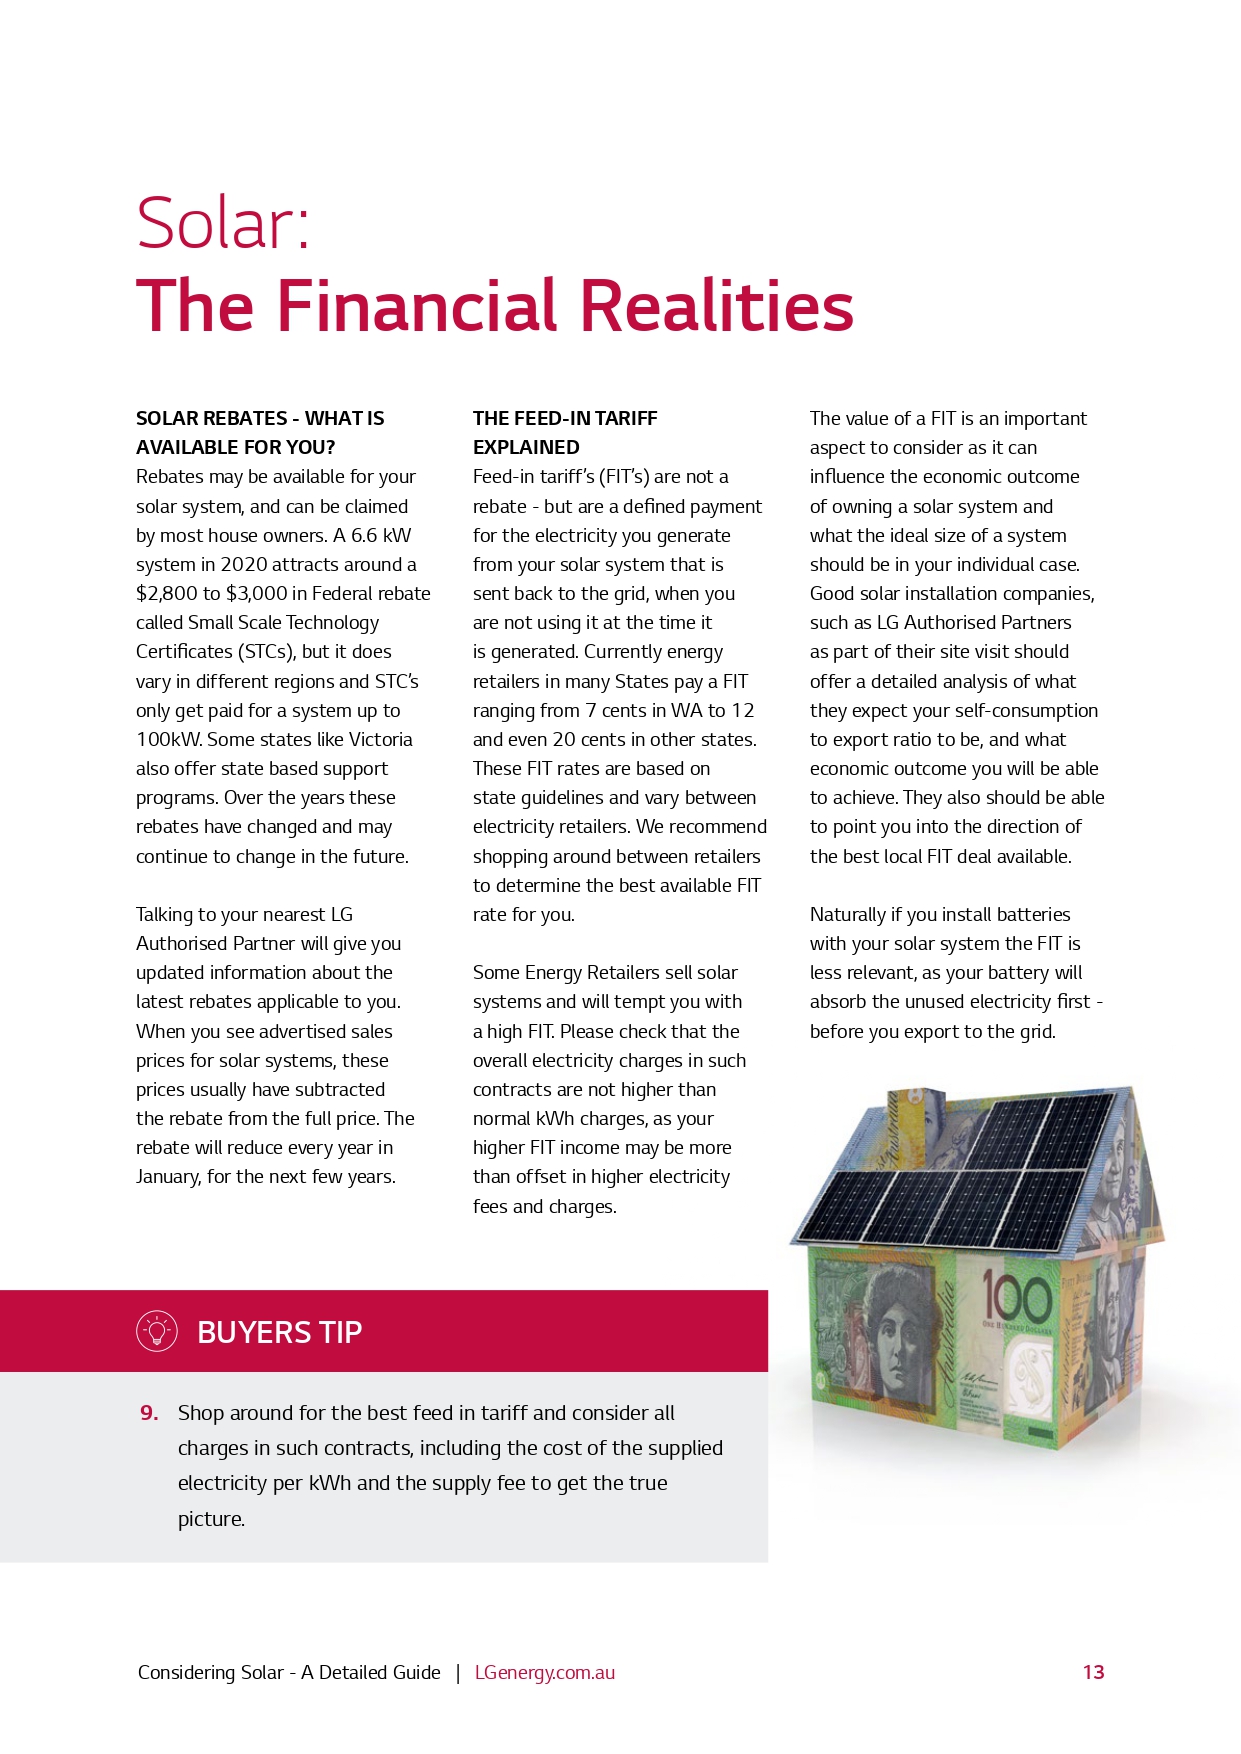 The Financial Realities of Solar